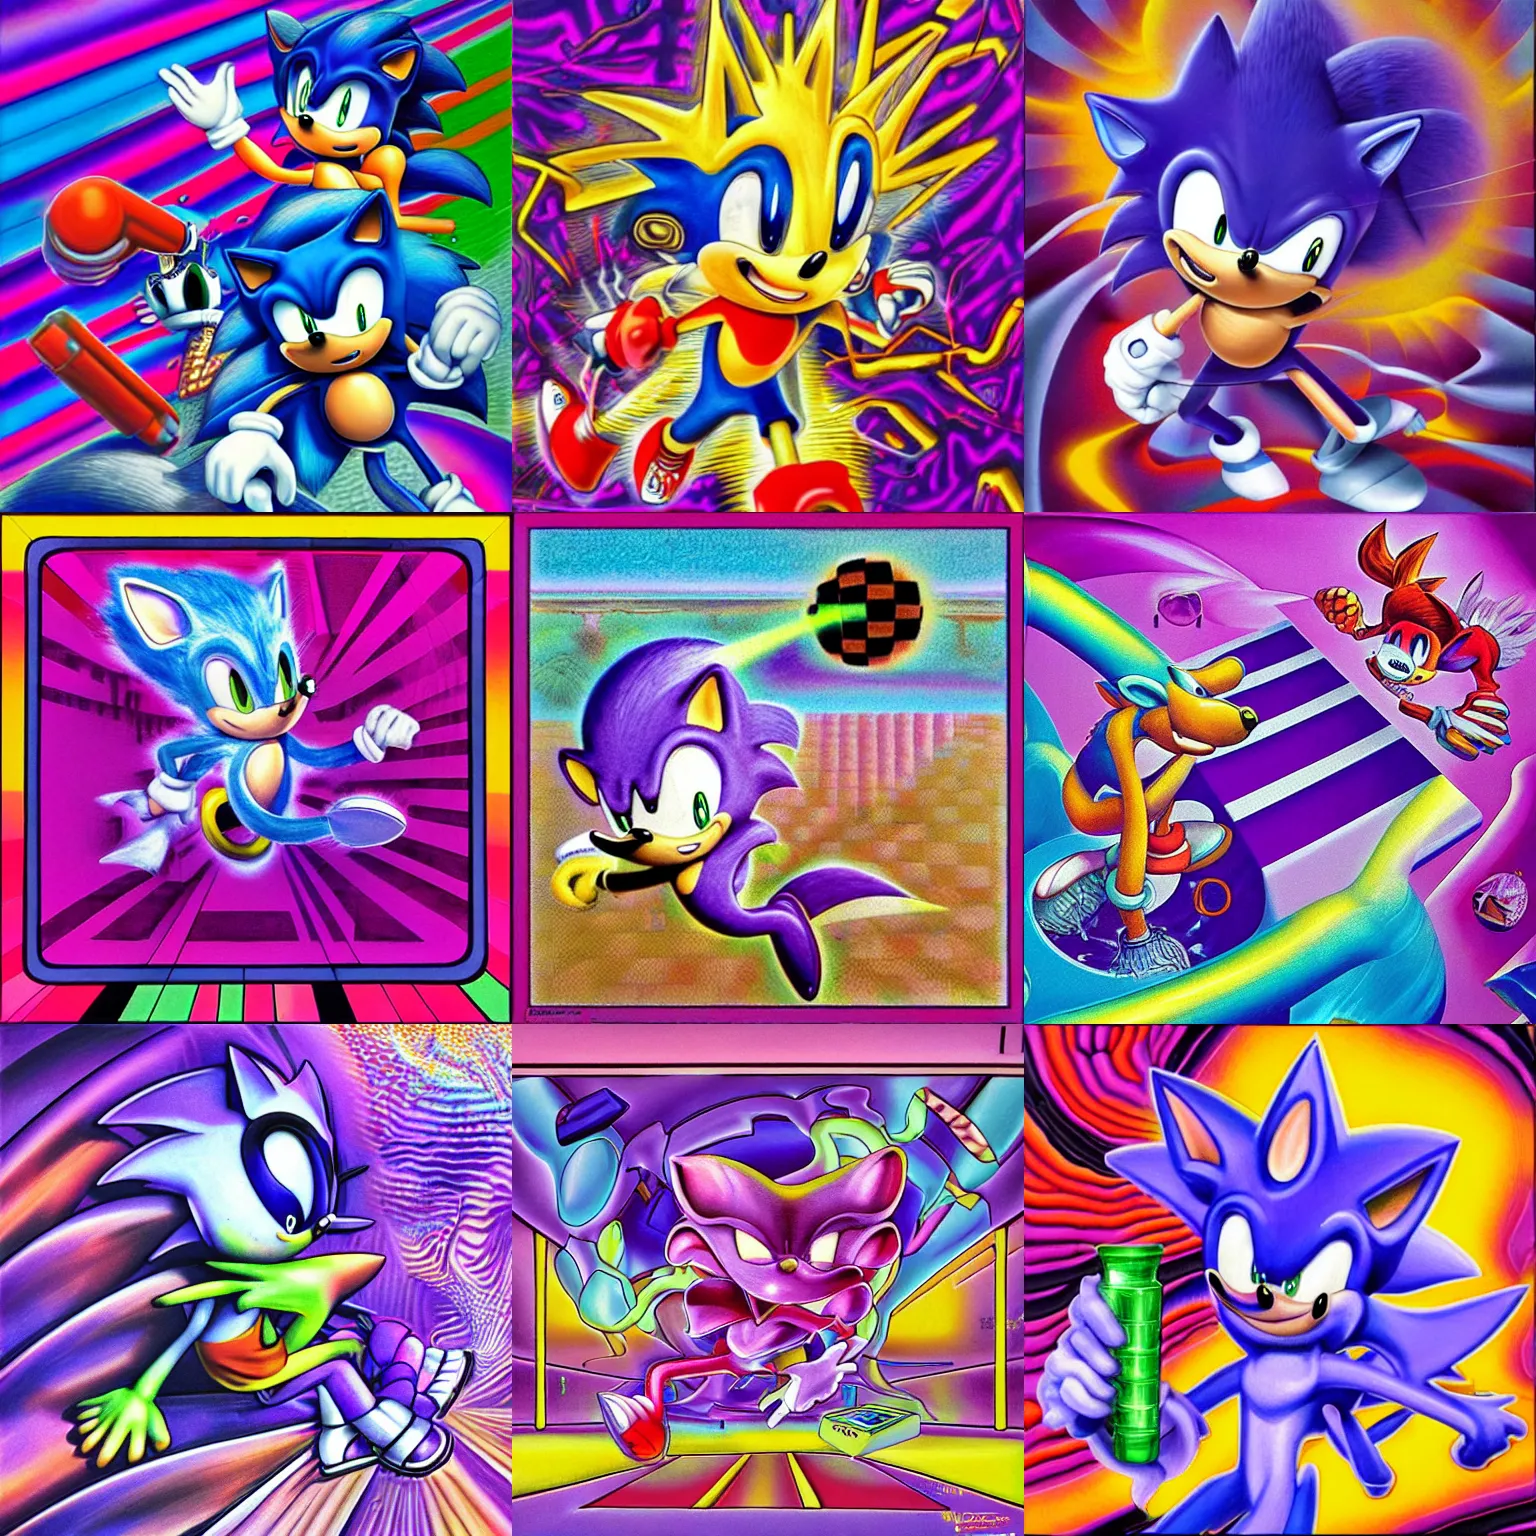 Prompt: surreal, sharp, detailed professional, soft pastels, high quality airbrush art album cover of a liquid dissolving airbrush art lsd dmt sonic the hedgehog swimming through cyberspace, purple checkerboard background, 1 9 9 0 s 1 9 9 2 sega genesis rareware video game album cover